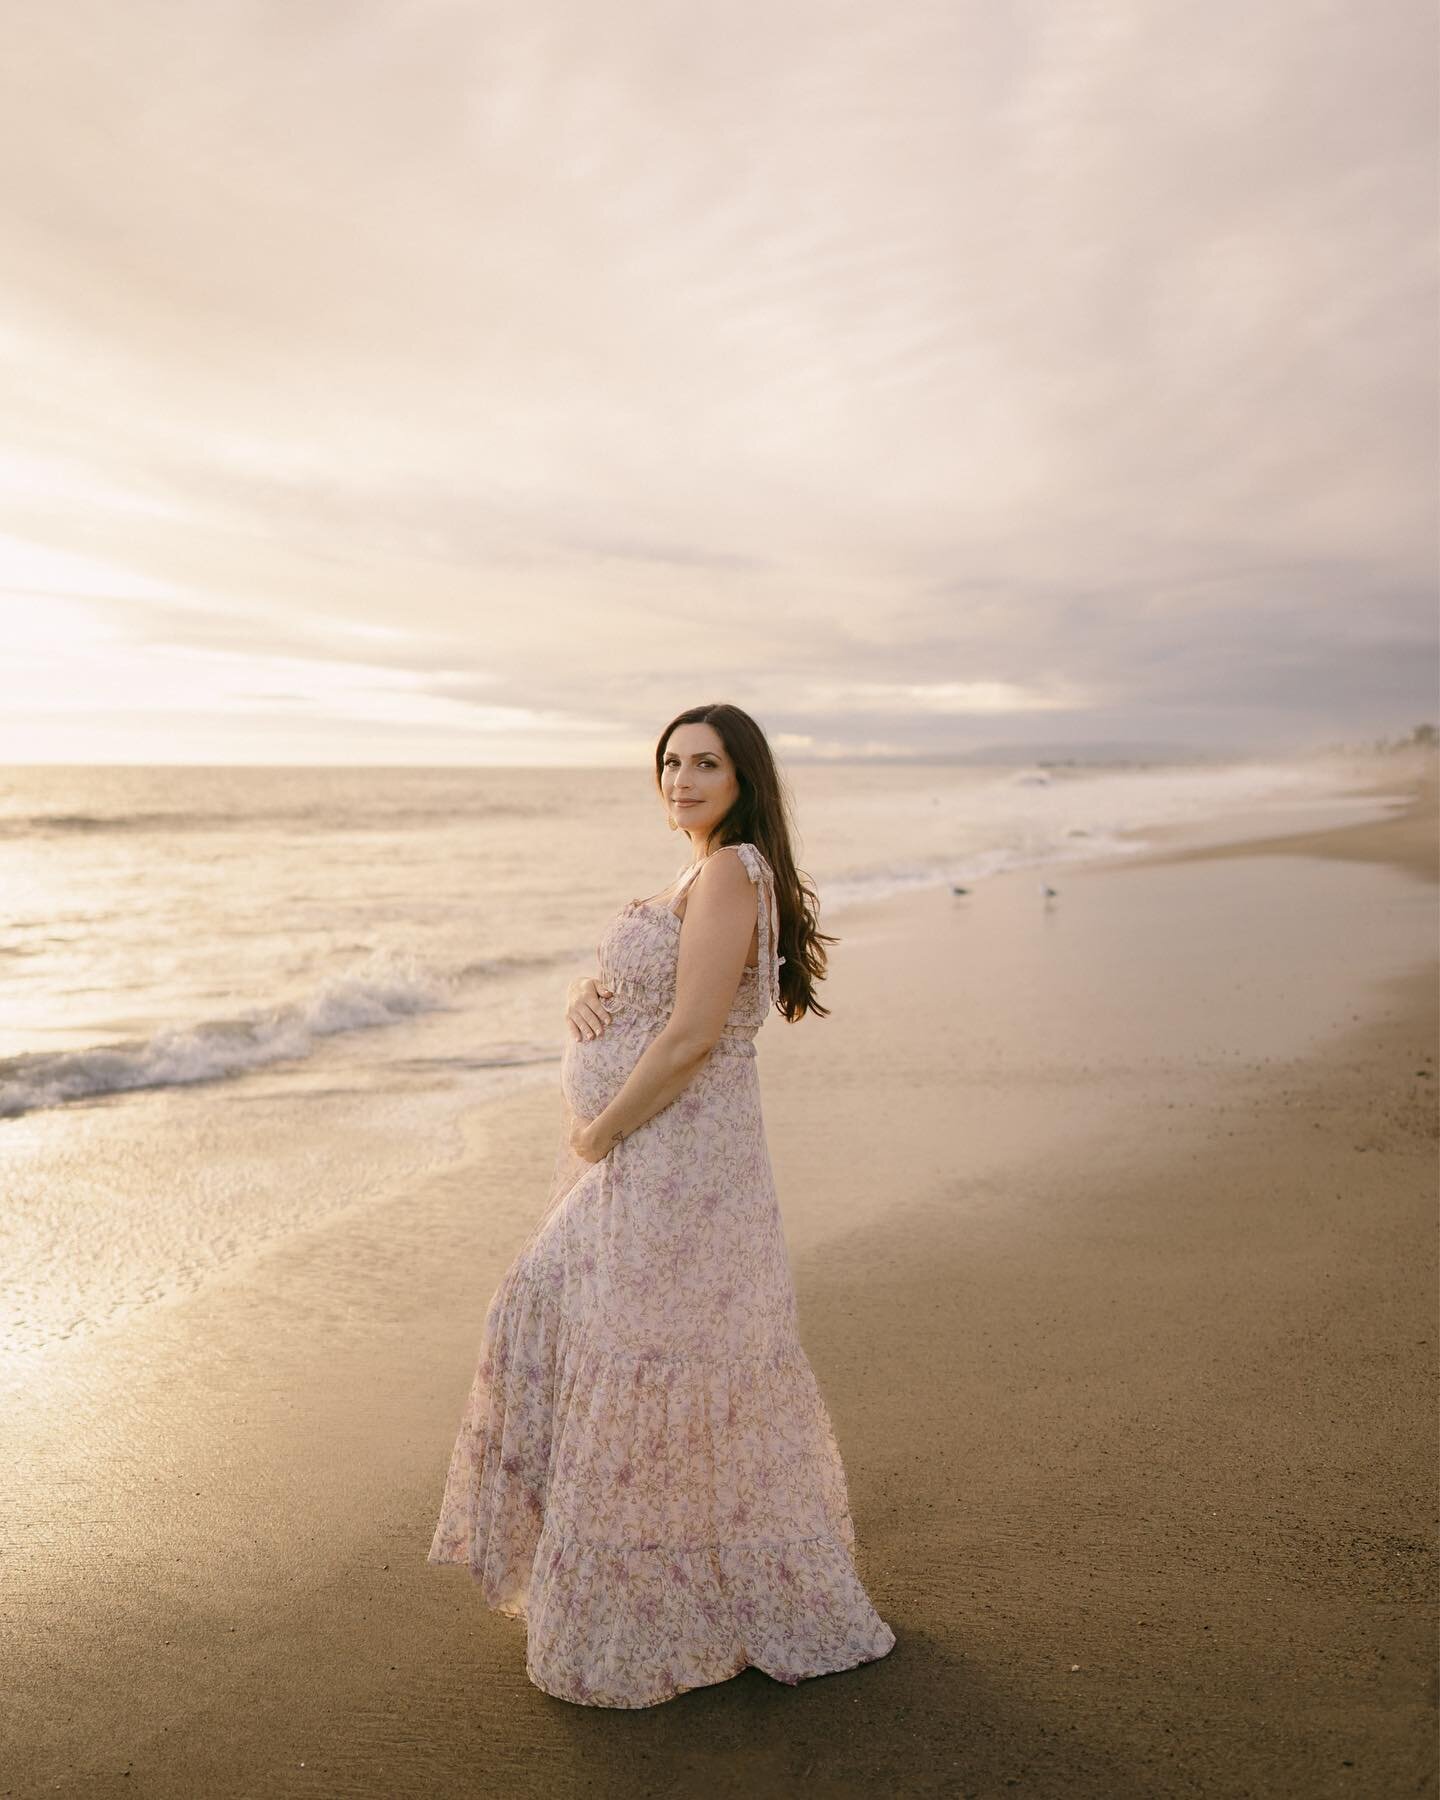 Such a stunning mama! I just love maternity sessions so much. 

Note to self: when telling clients to be careful going down the sandy stairs, be sure to follow the same advice. 🤪🙃